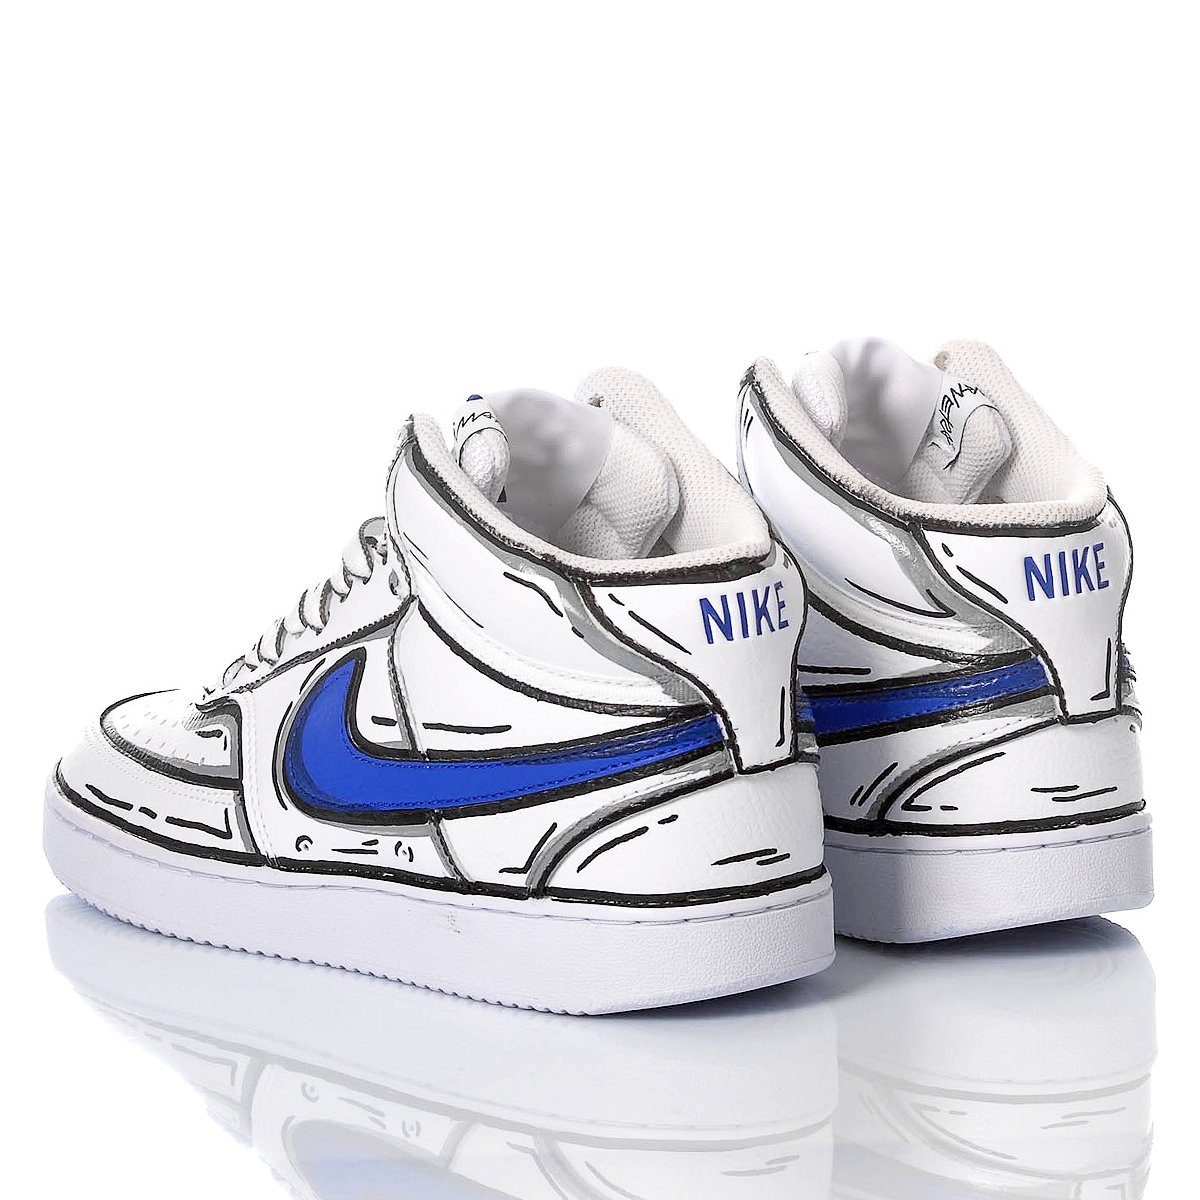 NIKE COMICS BLUE Air Force Vision Special